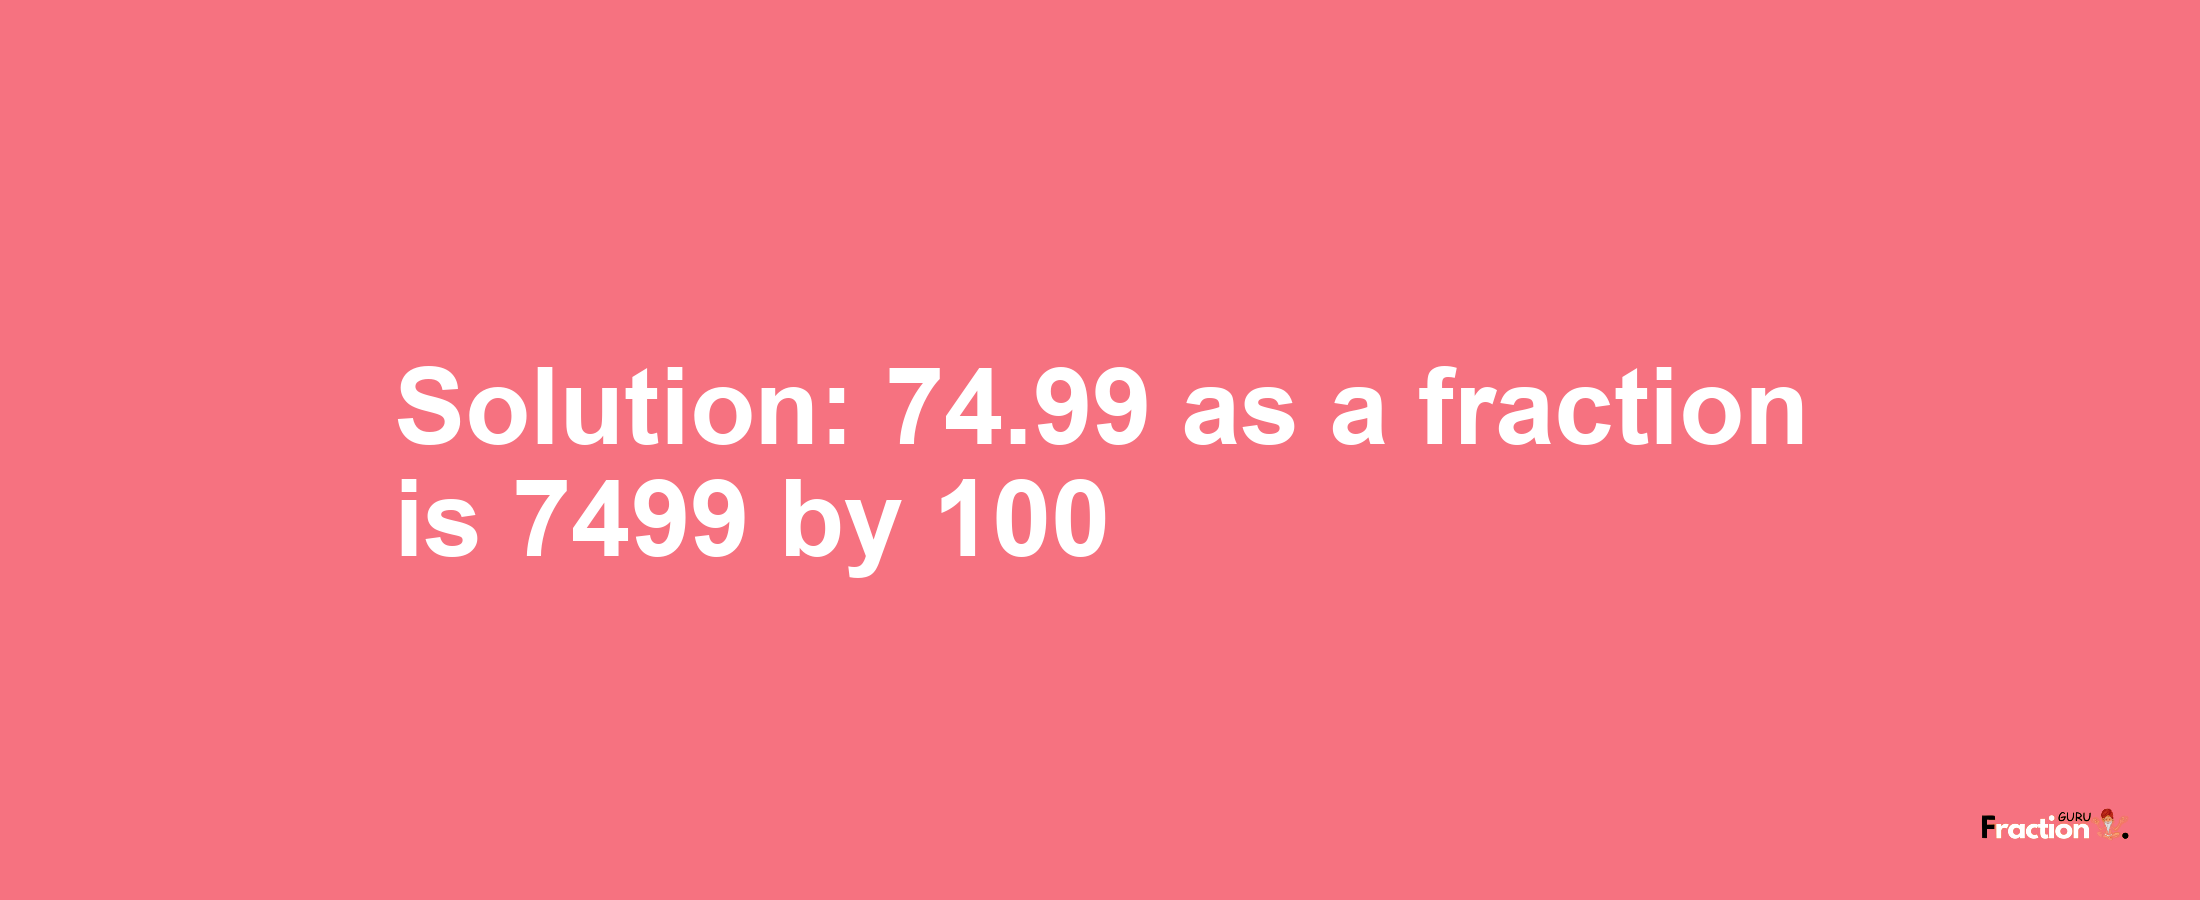 Solution:74.99 as a fraction is 7499/100